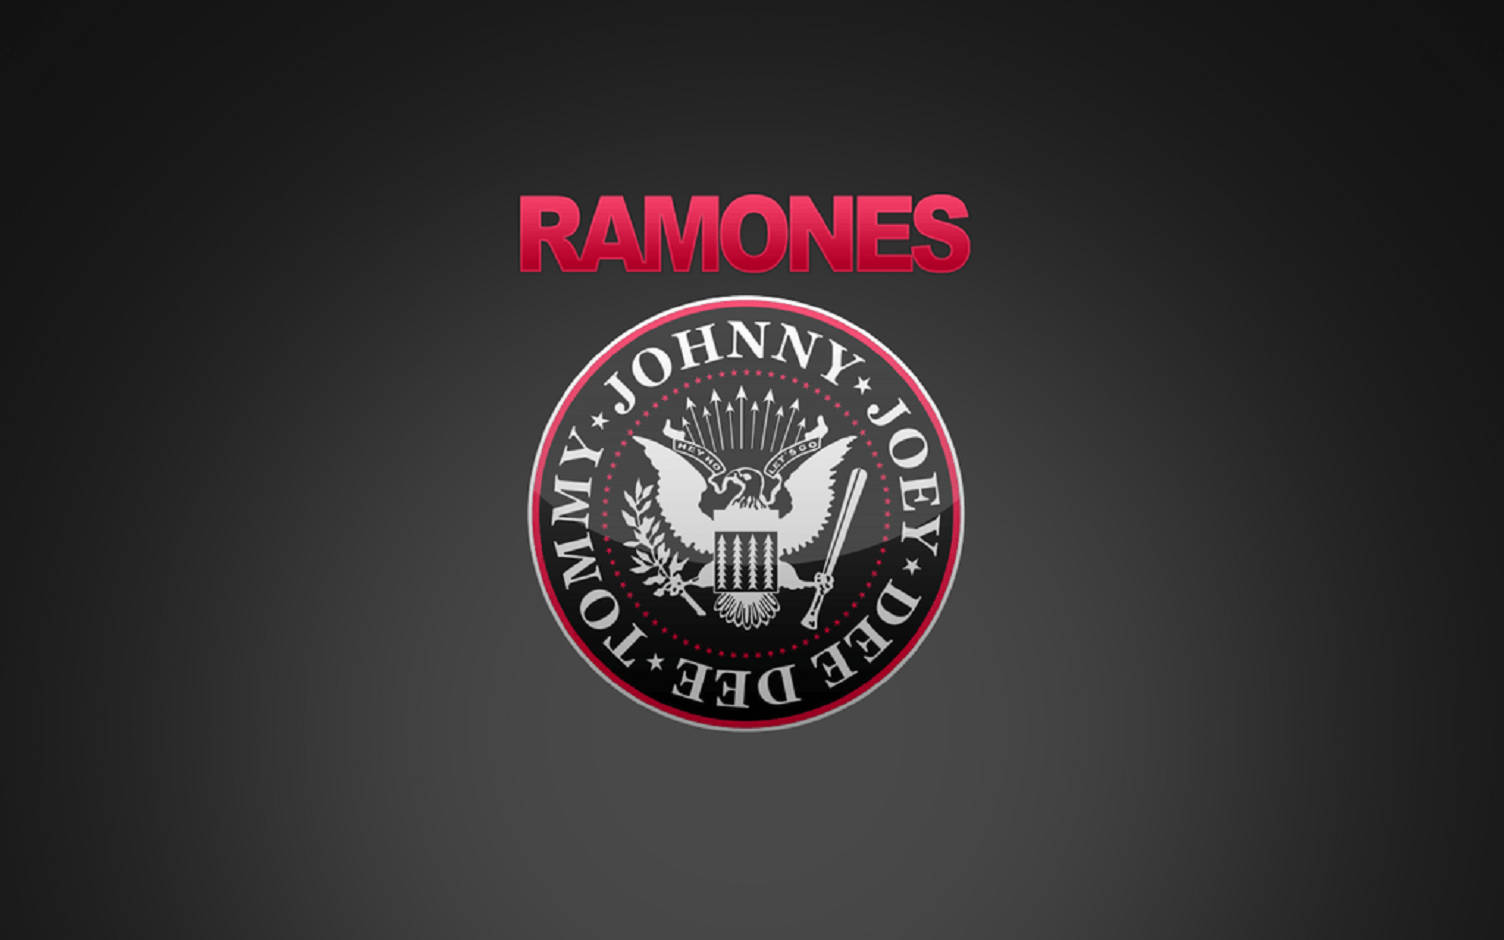 American Rock Band Ramones Eagle Seal Logo With Pink Typography Background